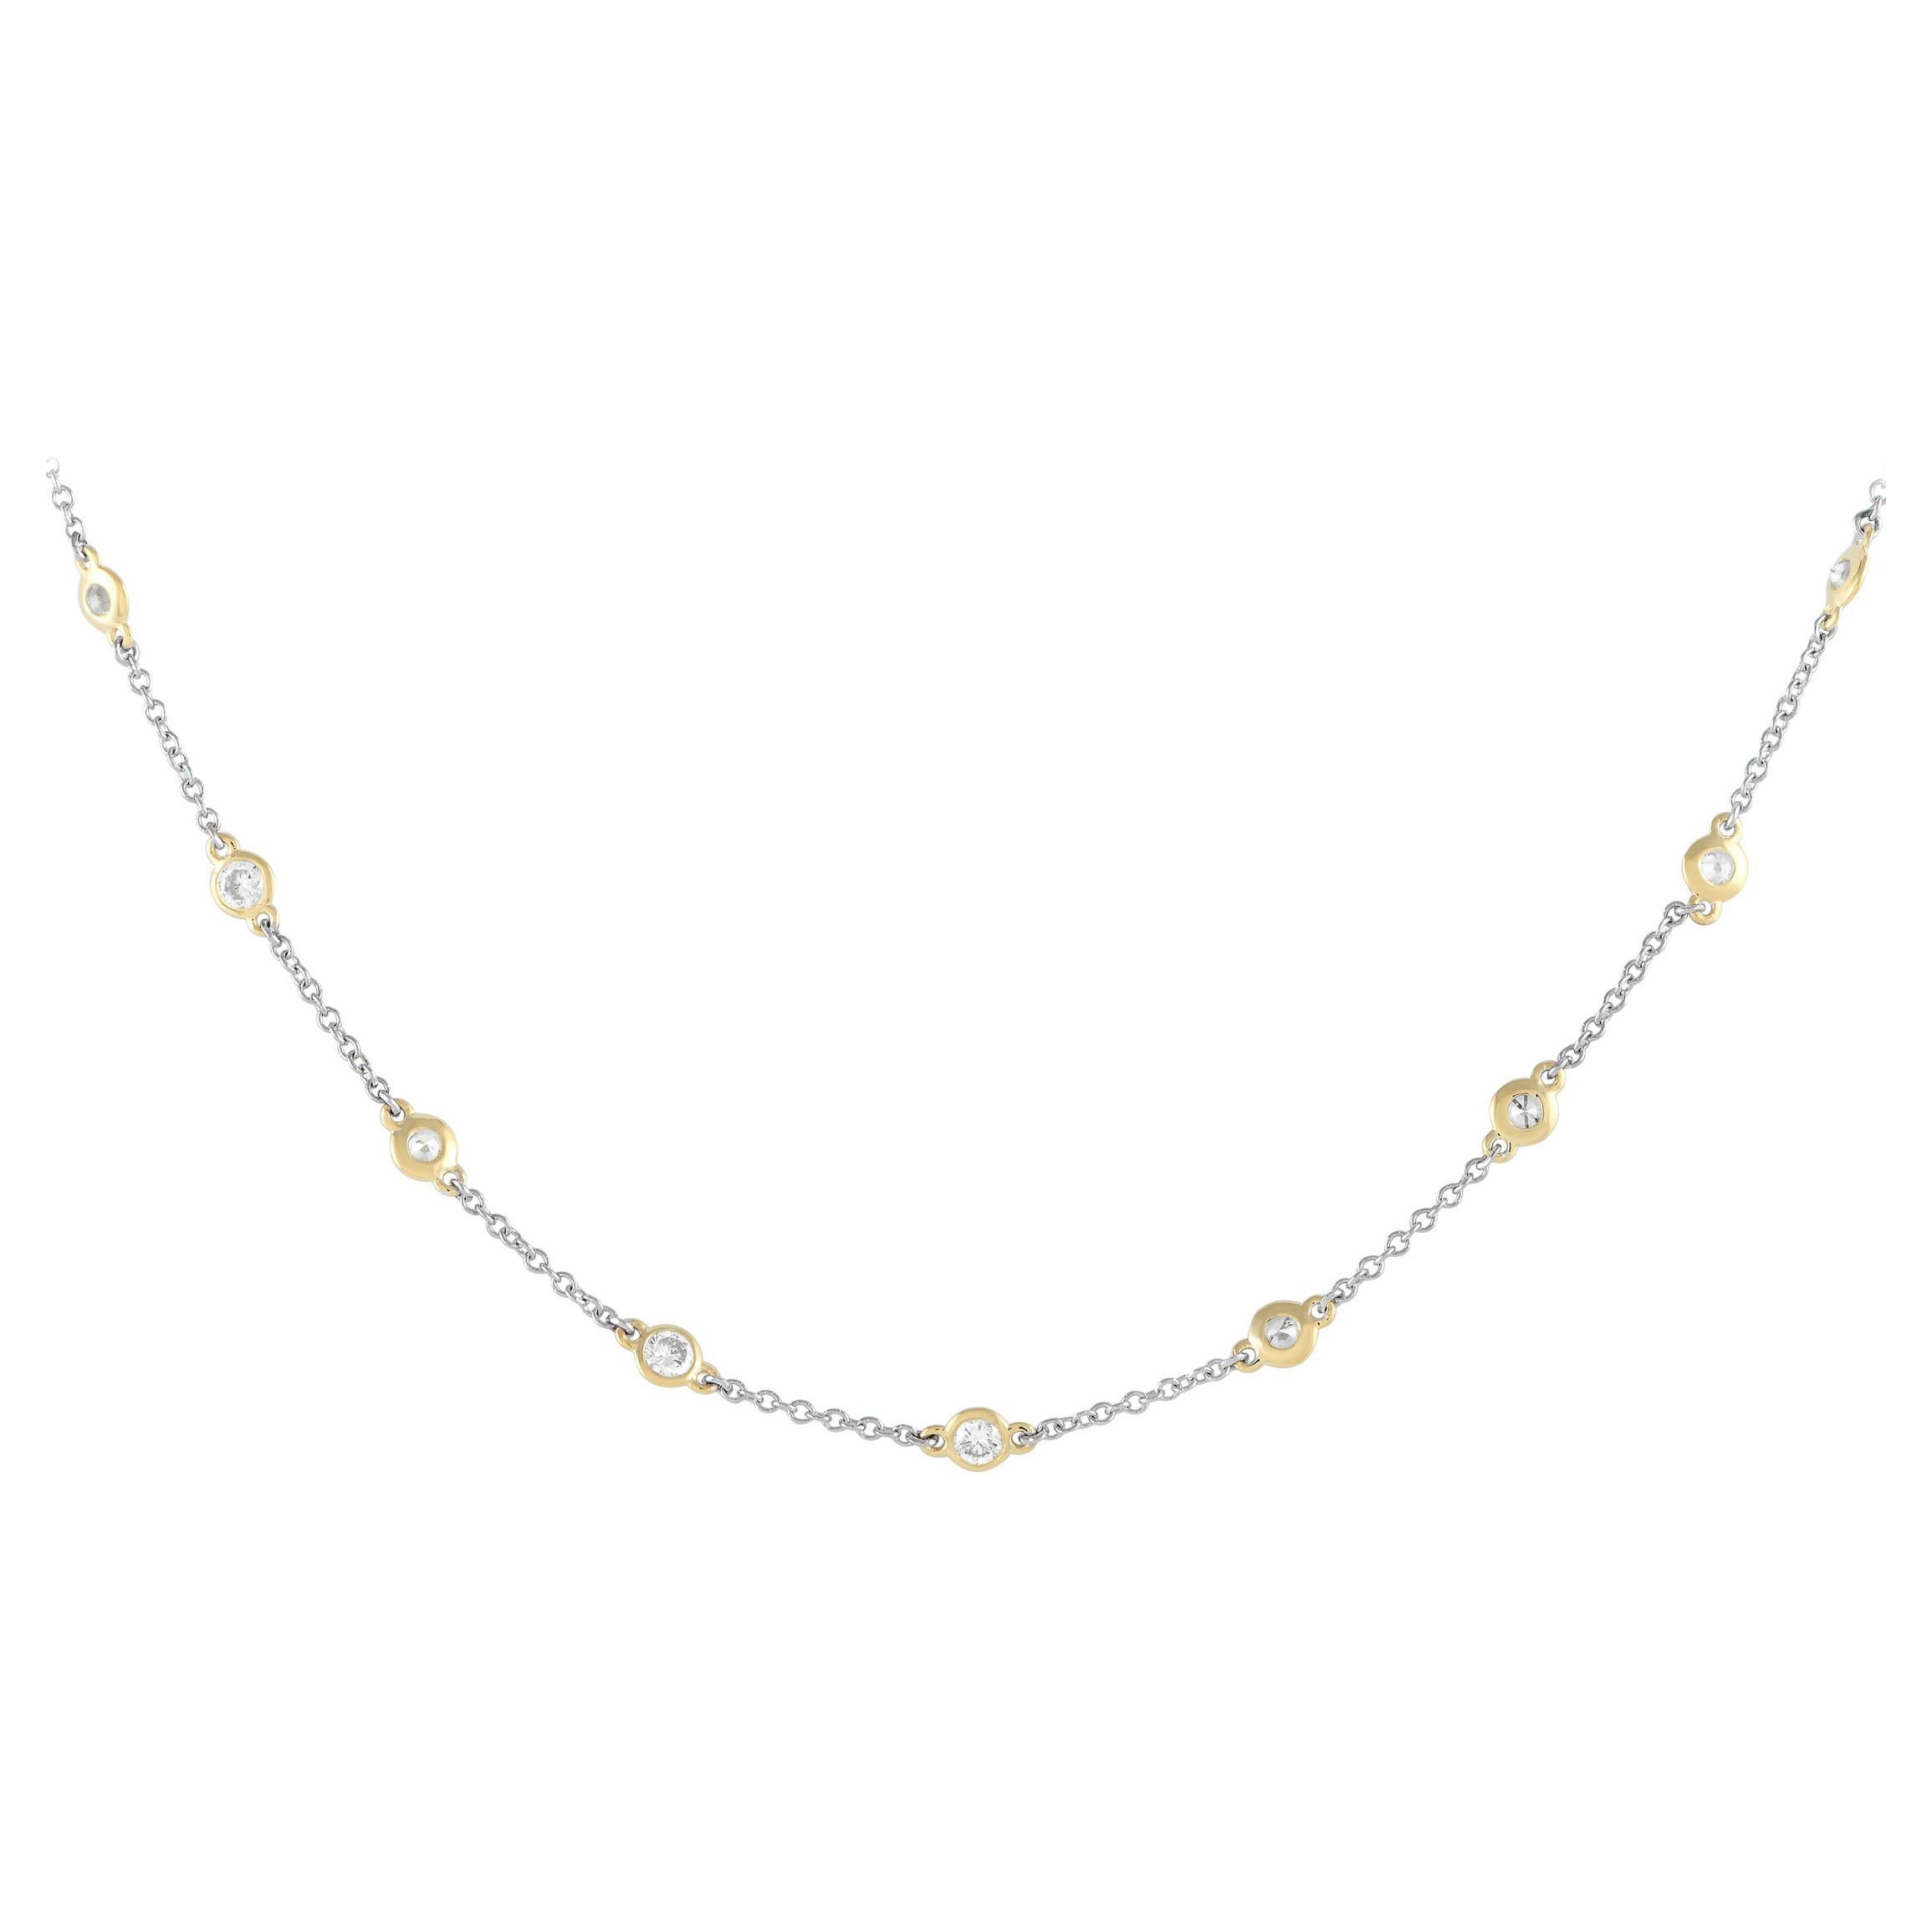 LB Exclusive 18K White and Yellow Gold 1.28ct Diamond Station Necklace